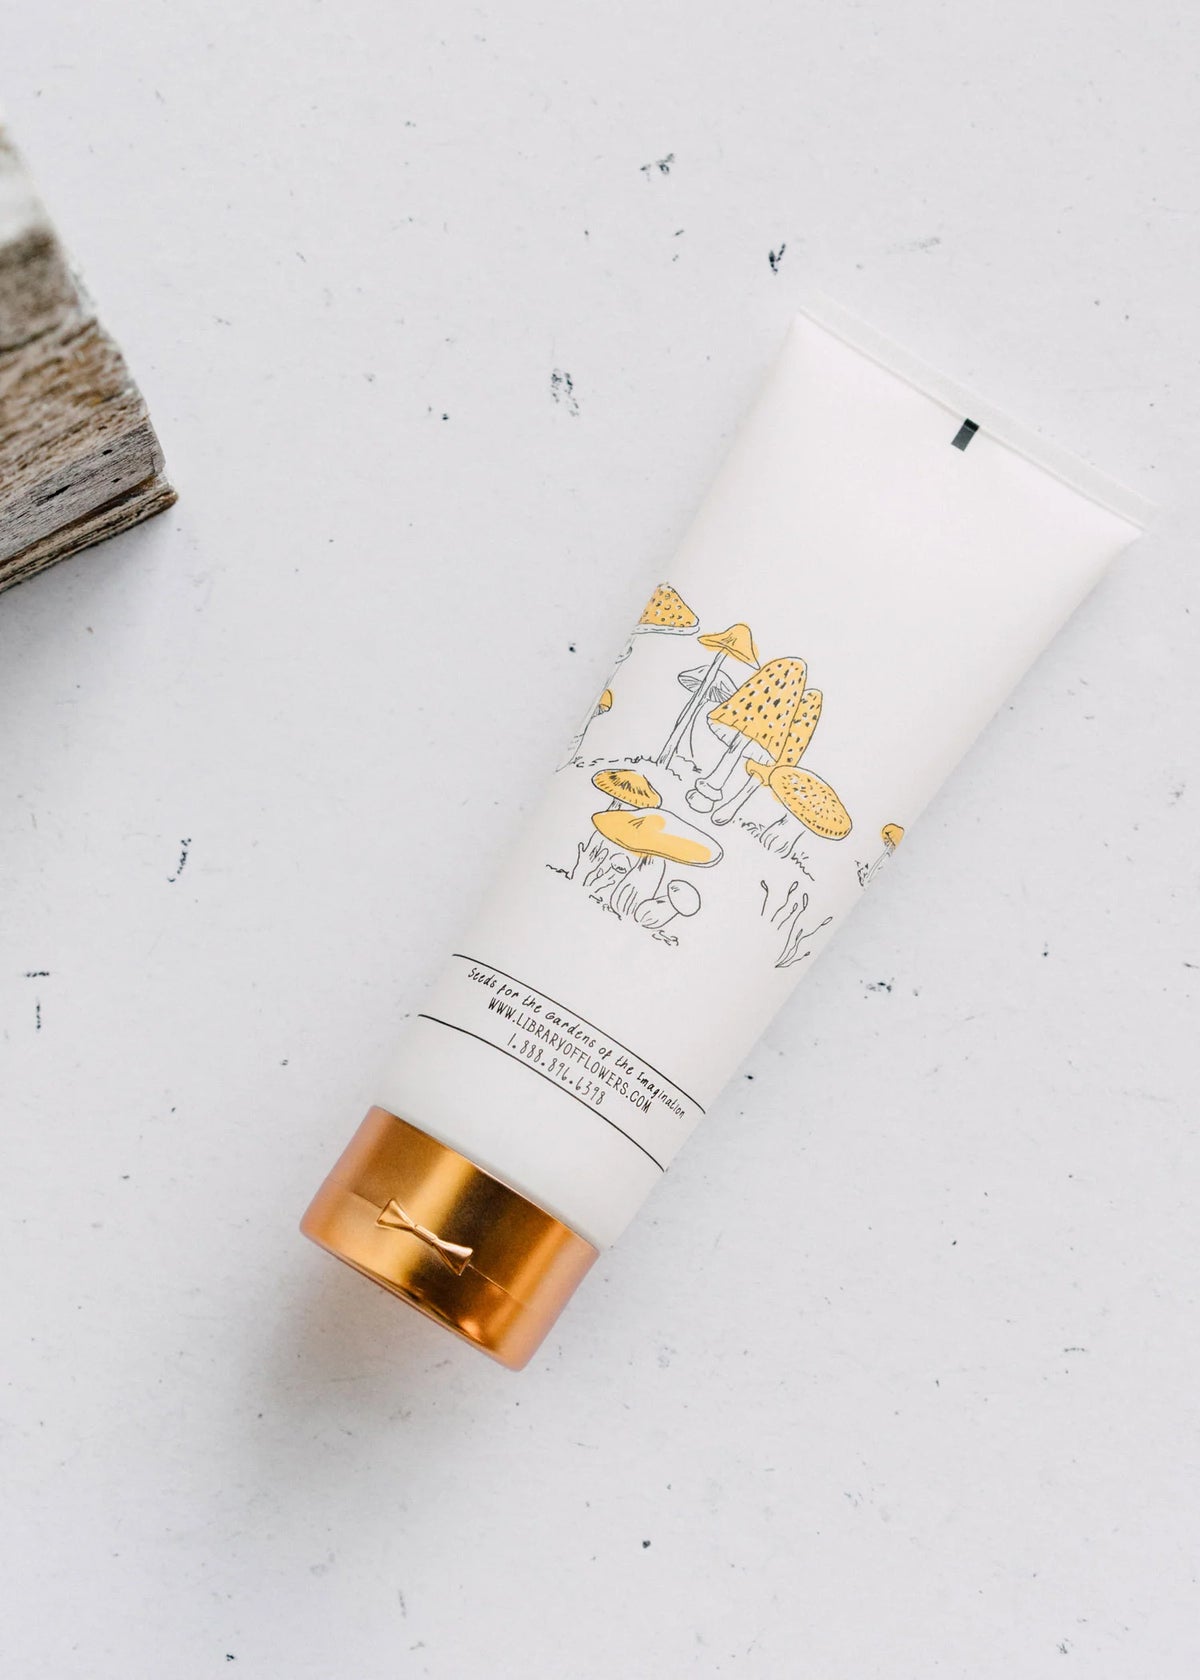 A tube of Library of Flowers Willow & Water Shower Gel with a gold cap and illustrations of mushrooms on a white background, placed next to a wooden object in the Gardens of Imagination by Margot Elena.